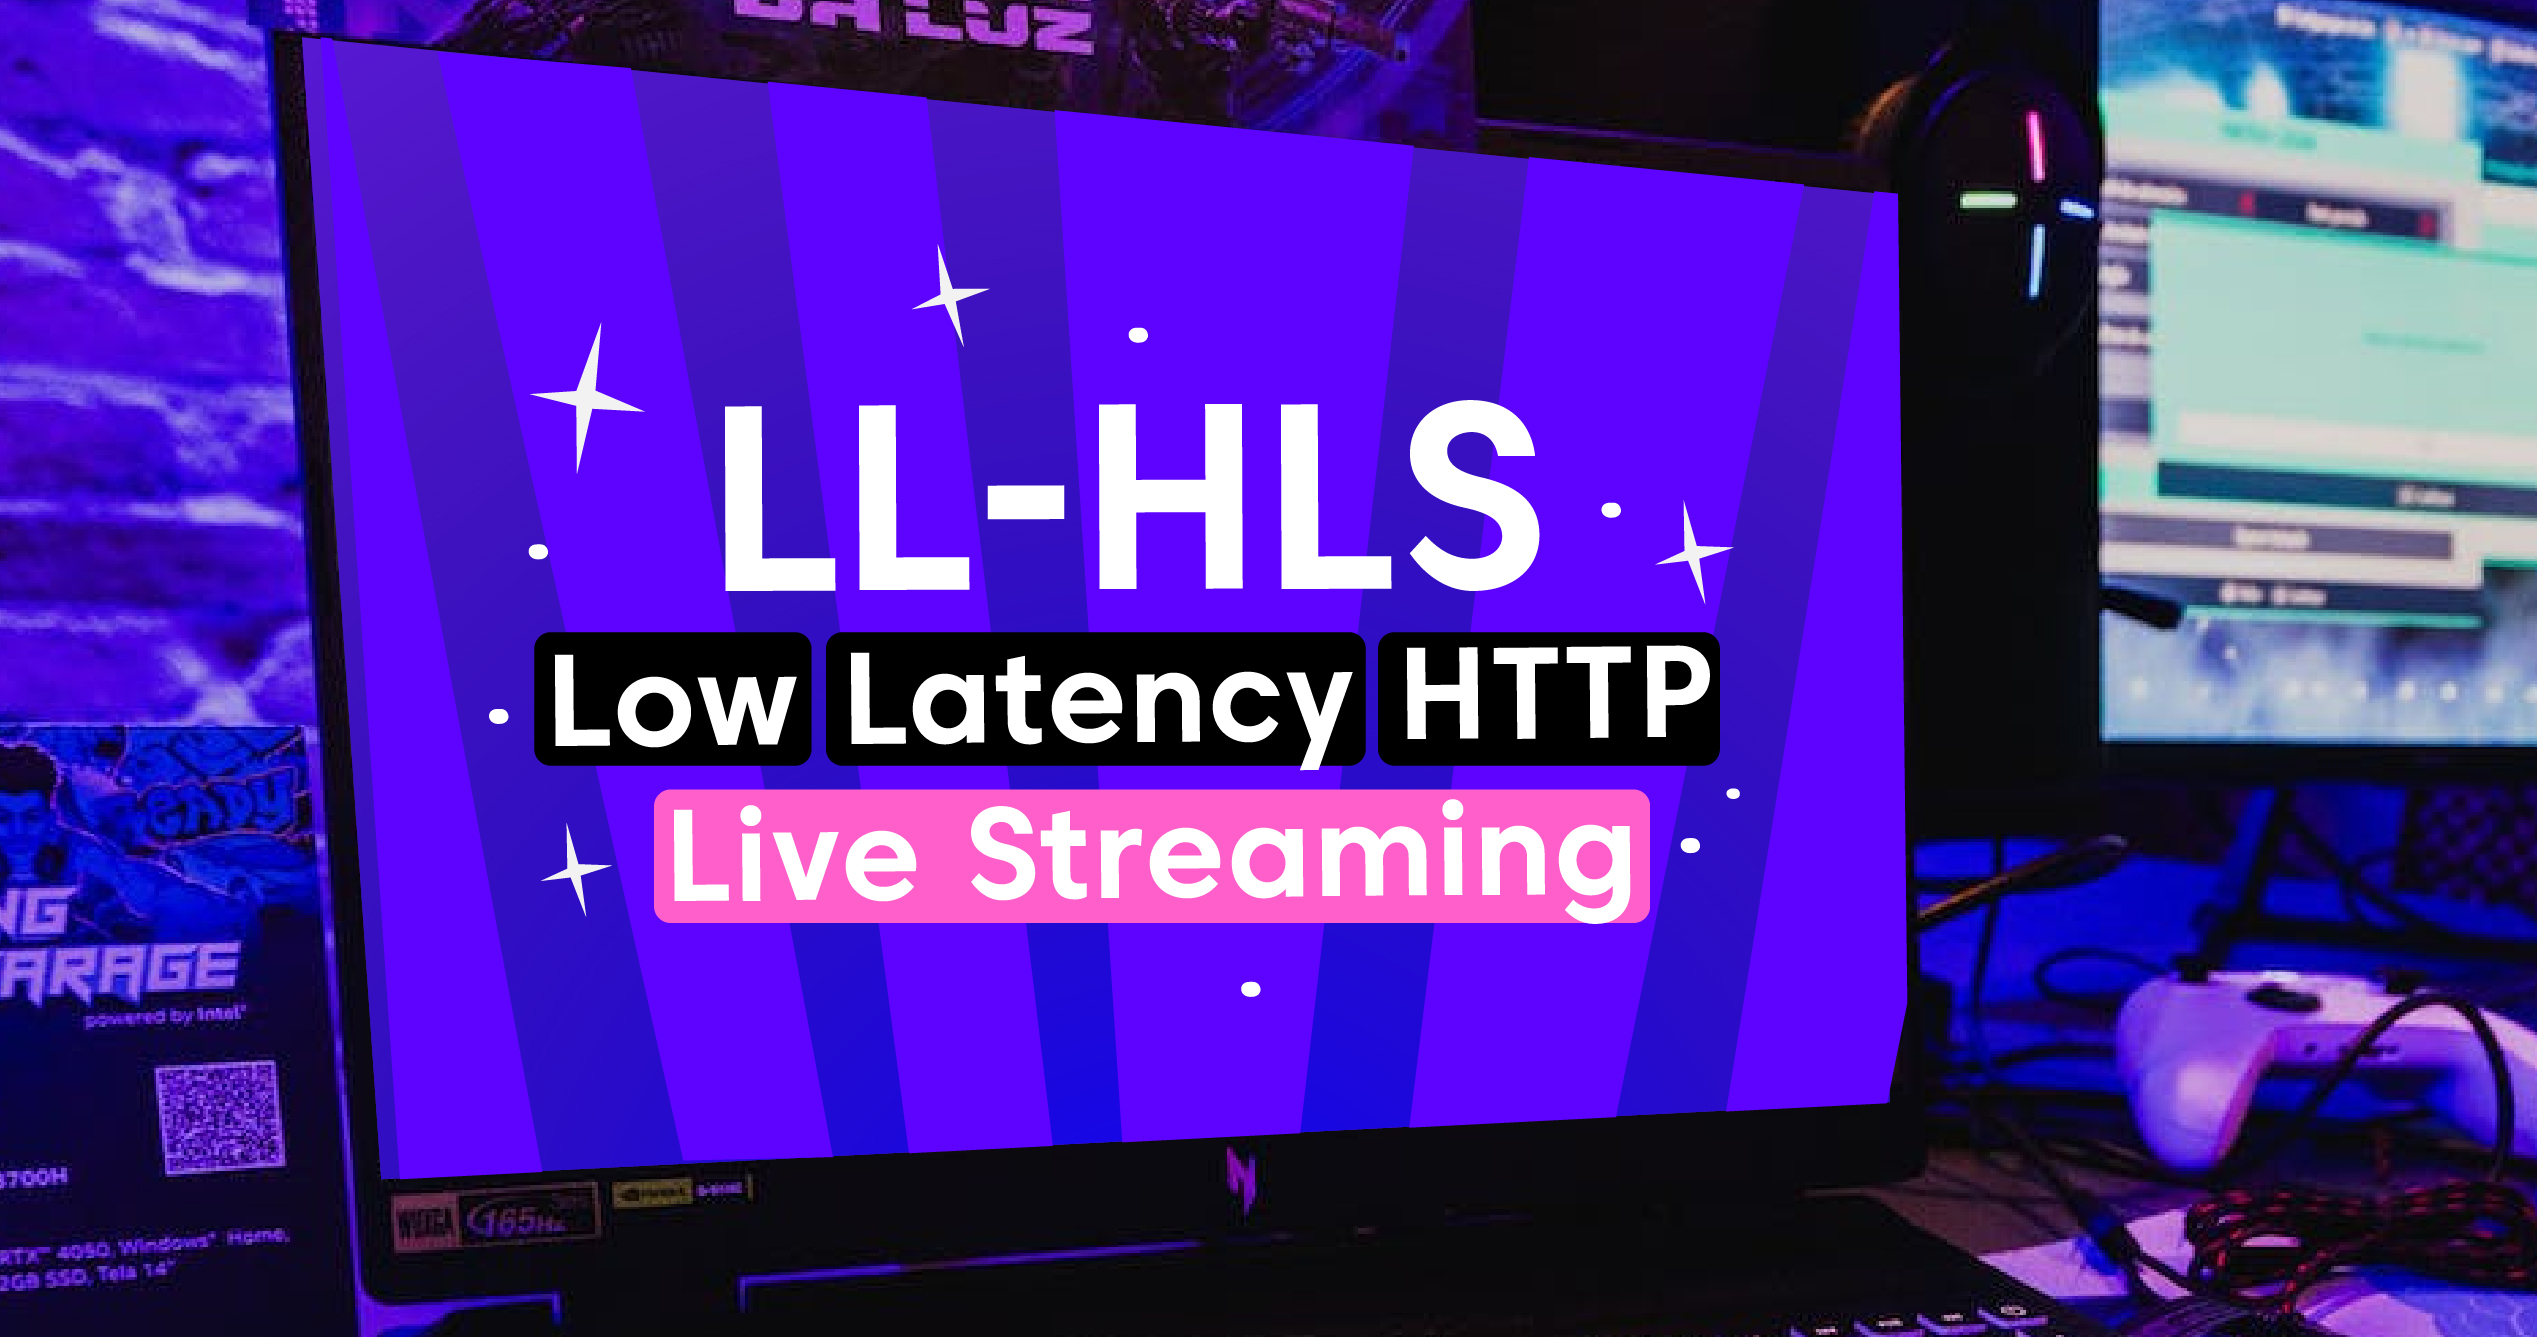 Low Latency HTTP Live Streaming (LL HLS) Explained